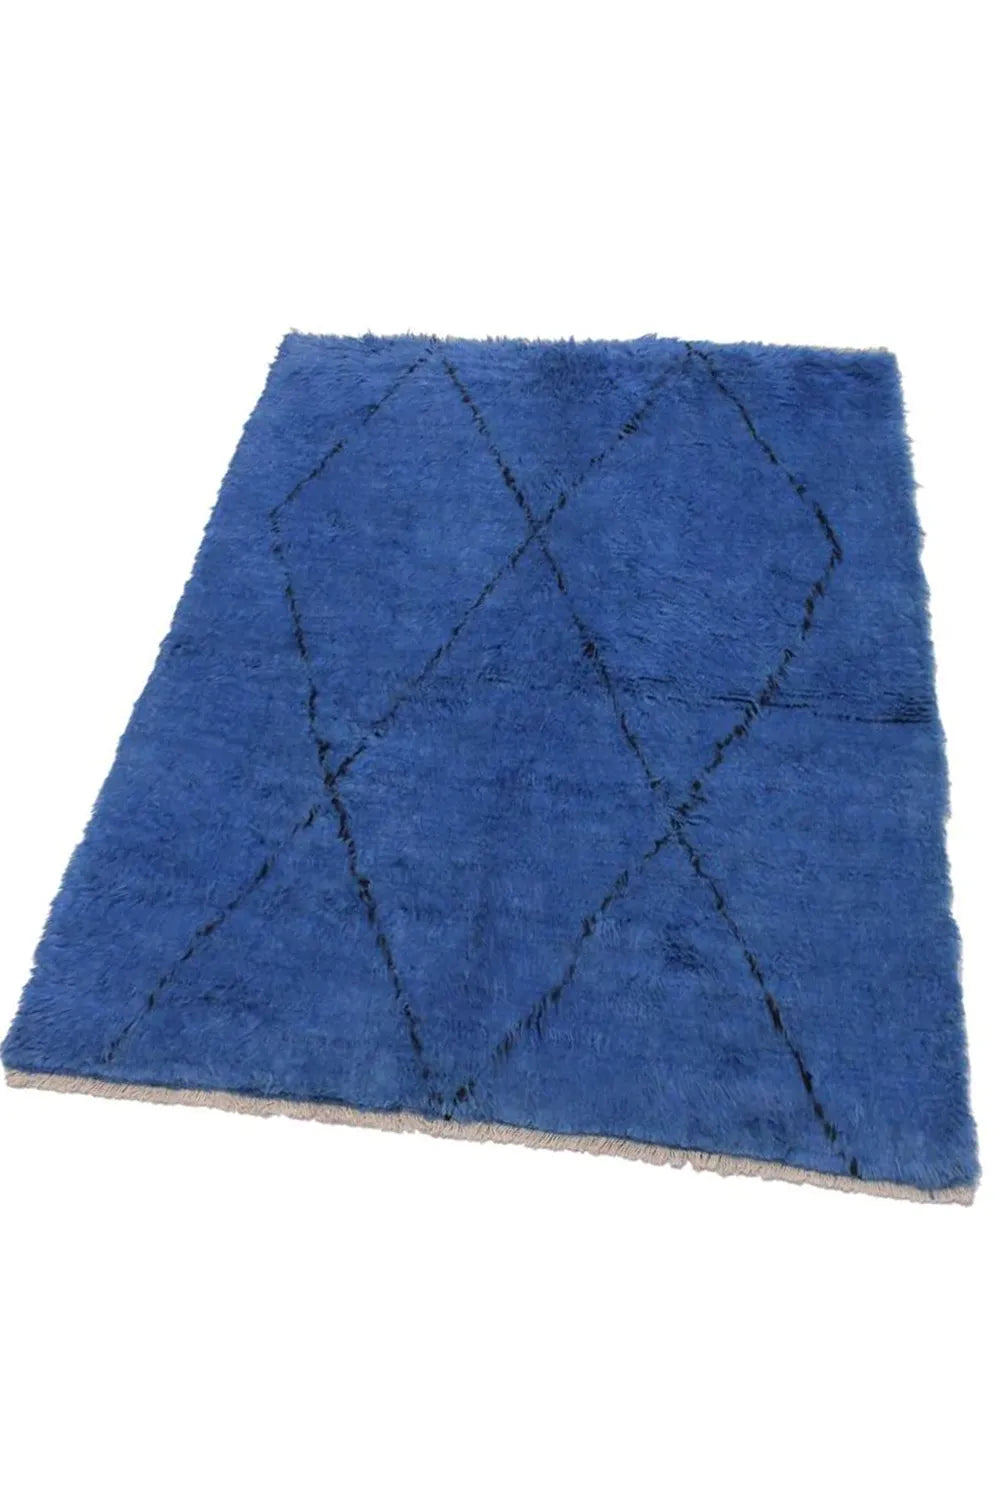 Navy Blue Luxury Shag Area Rug in 6x9 Size - Perfect for Upscale Interiors